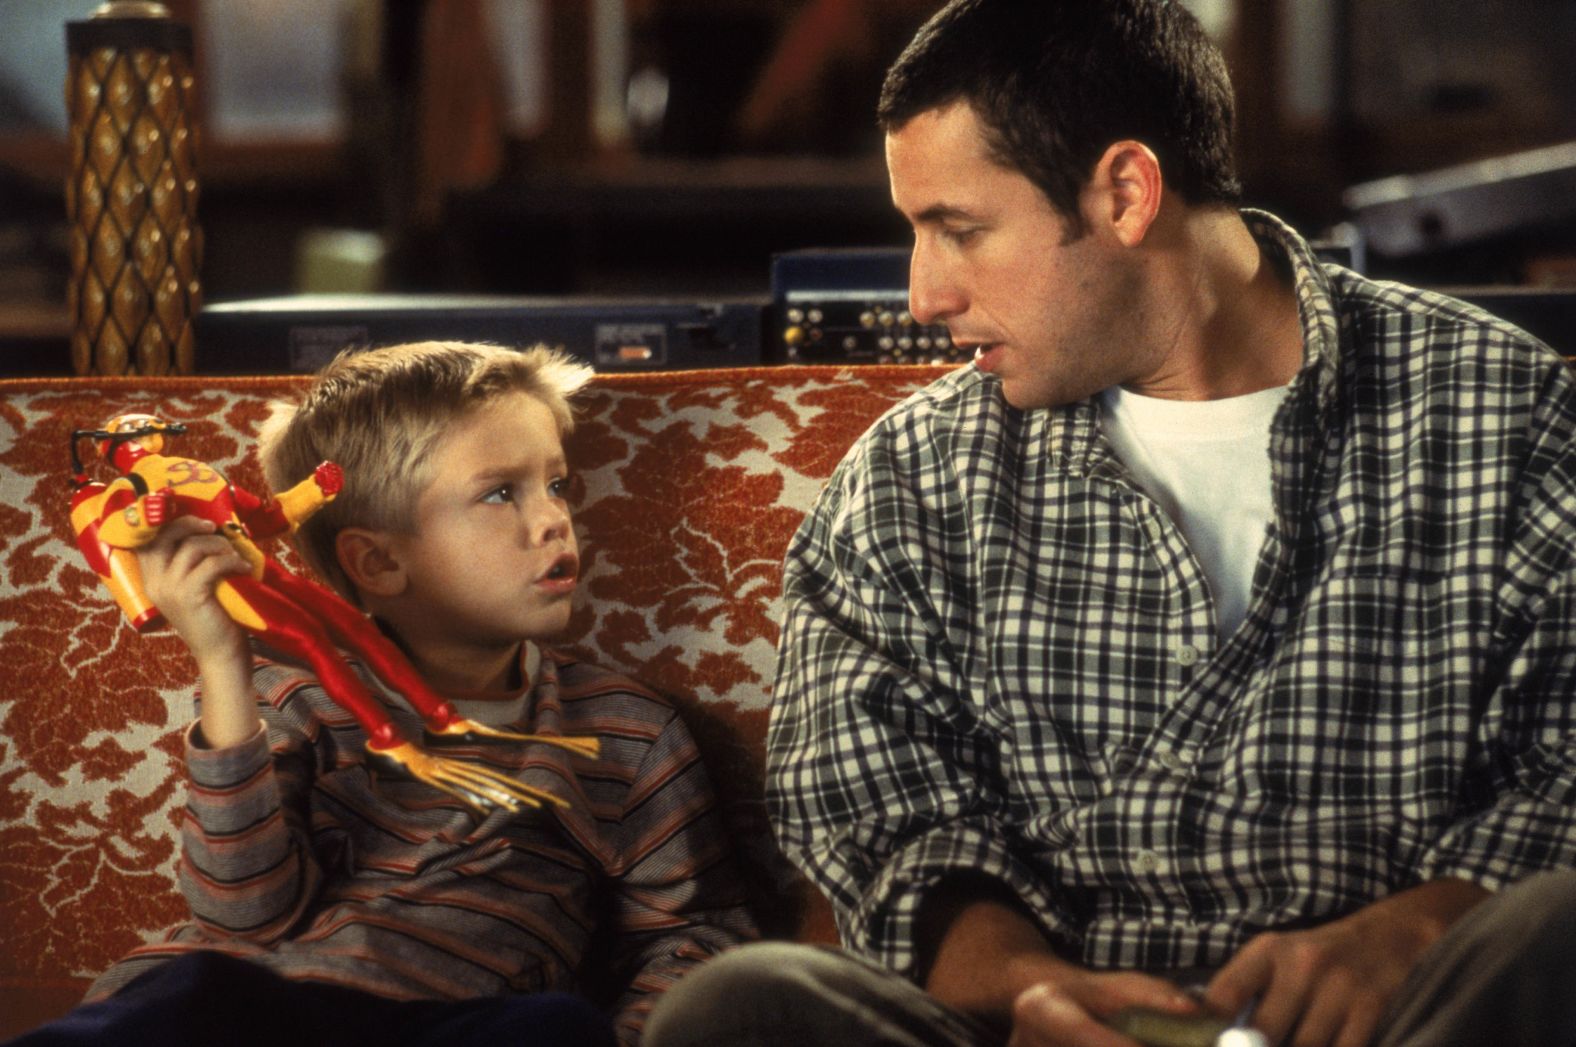 Sandler played opposite Cole and Dylan Sprouse in 1999's "Big Daddy."